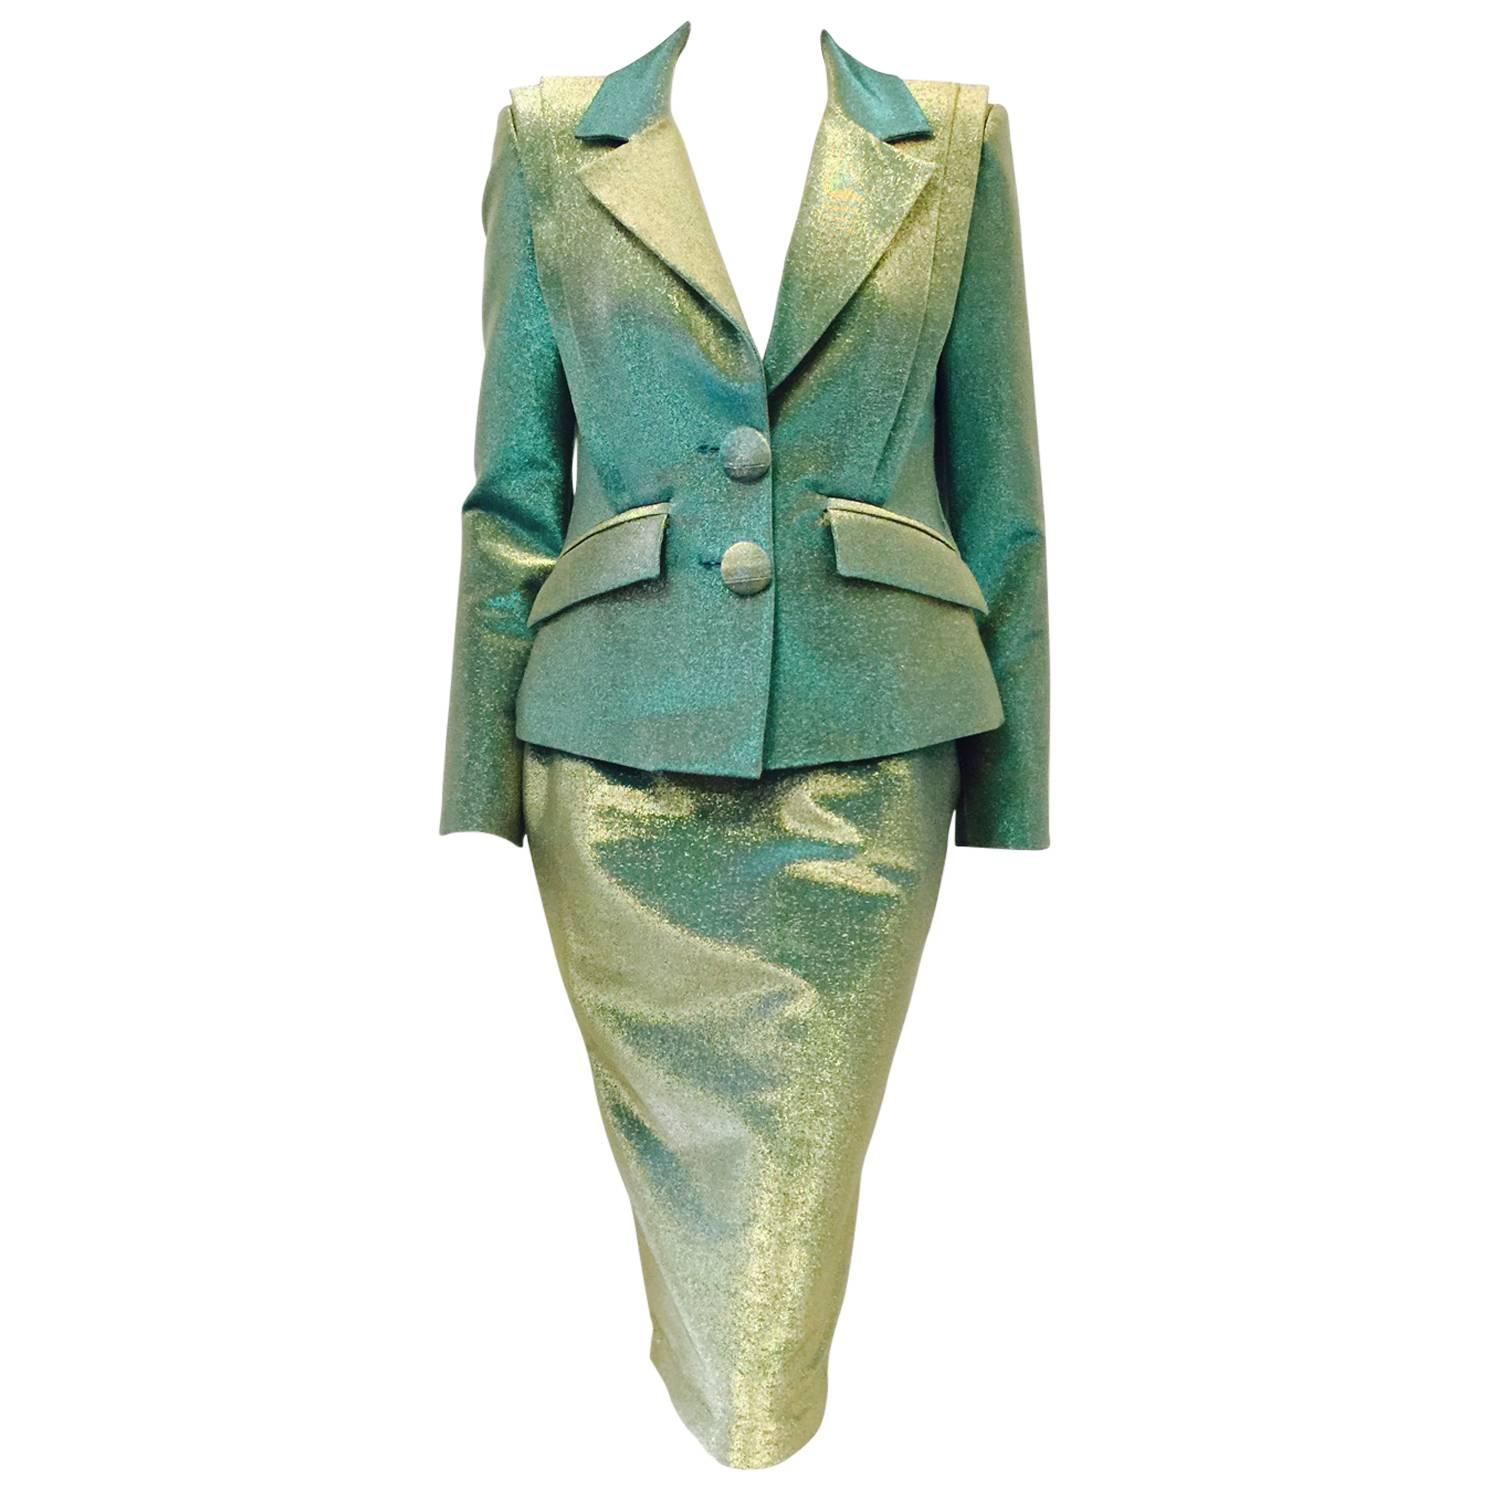 Vivienne Westwood Anglomania Green and Gold Iridescent Cotton Skirt Suit 